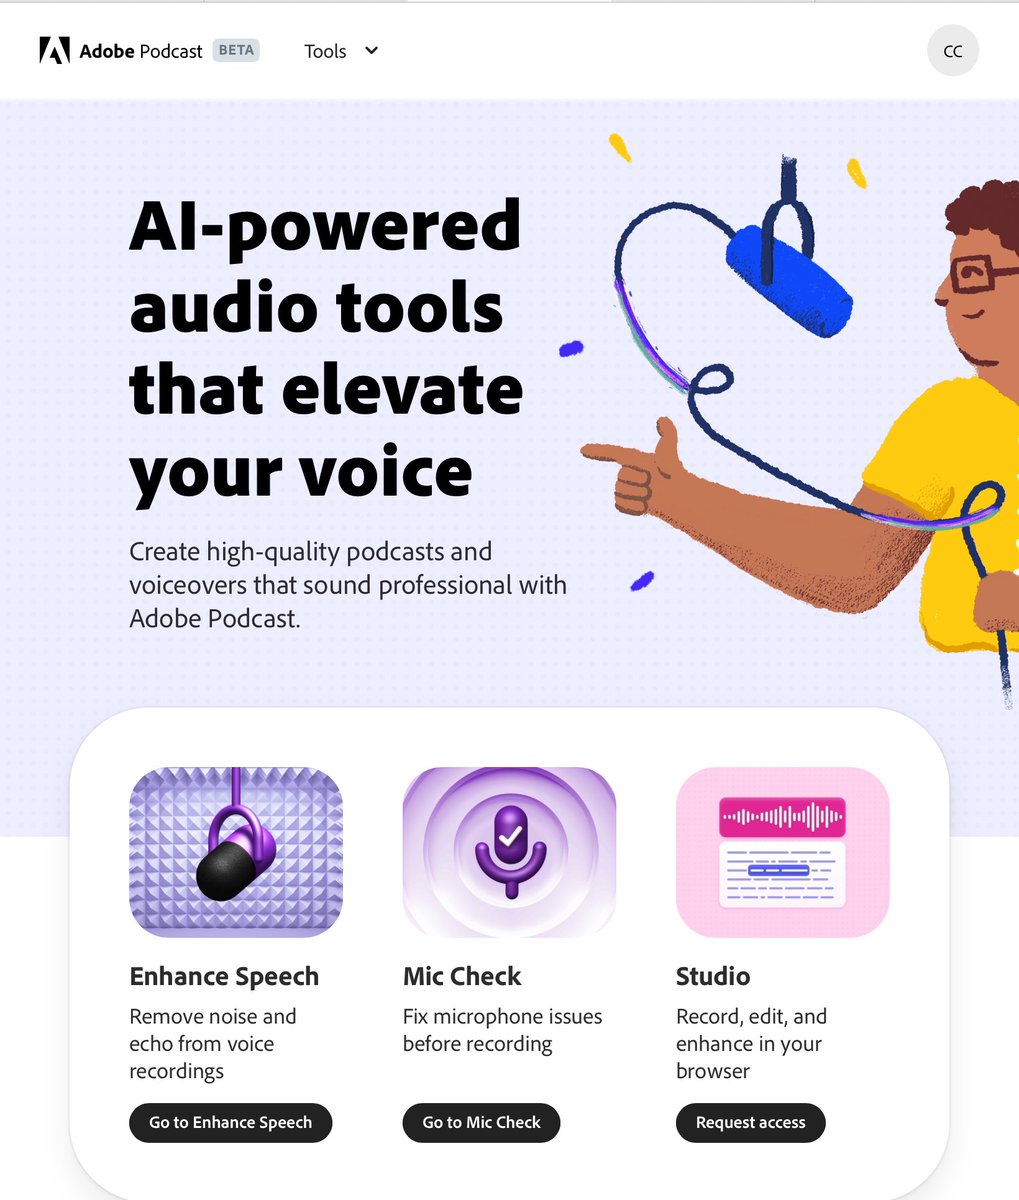 Adobe podcast reduces the background noise from your audios. #freetool #AI